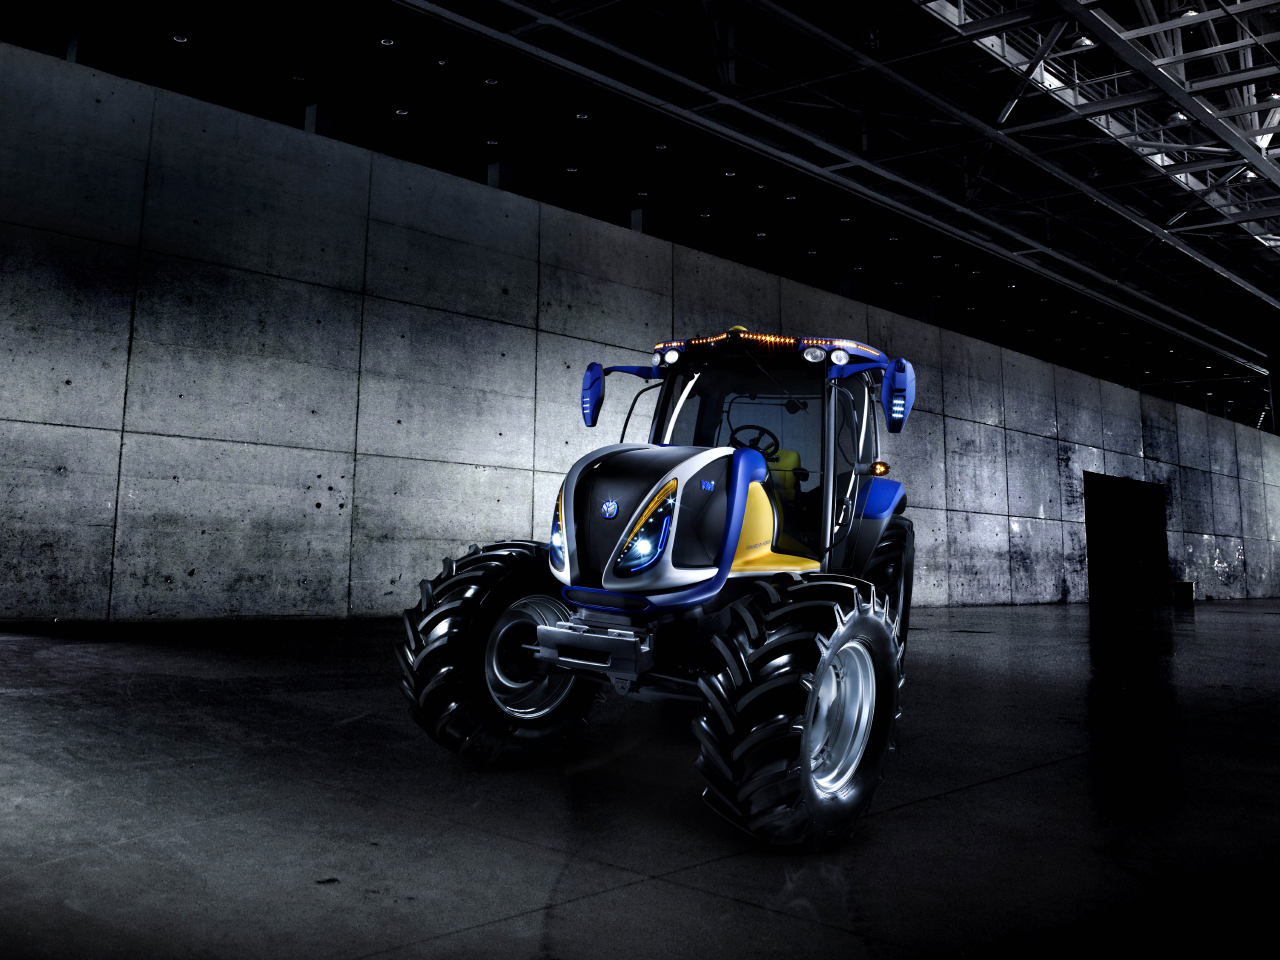 5 New Holland Tractor HD Wallpapers | Backgrounds - Wallpaper Abyss